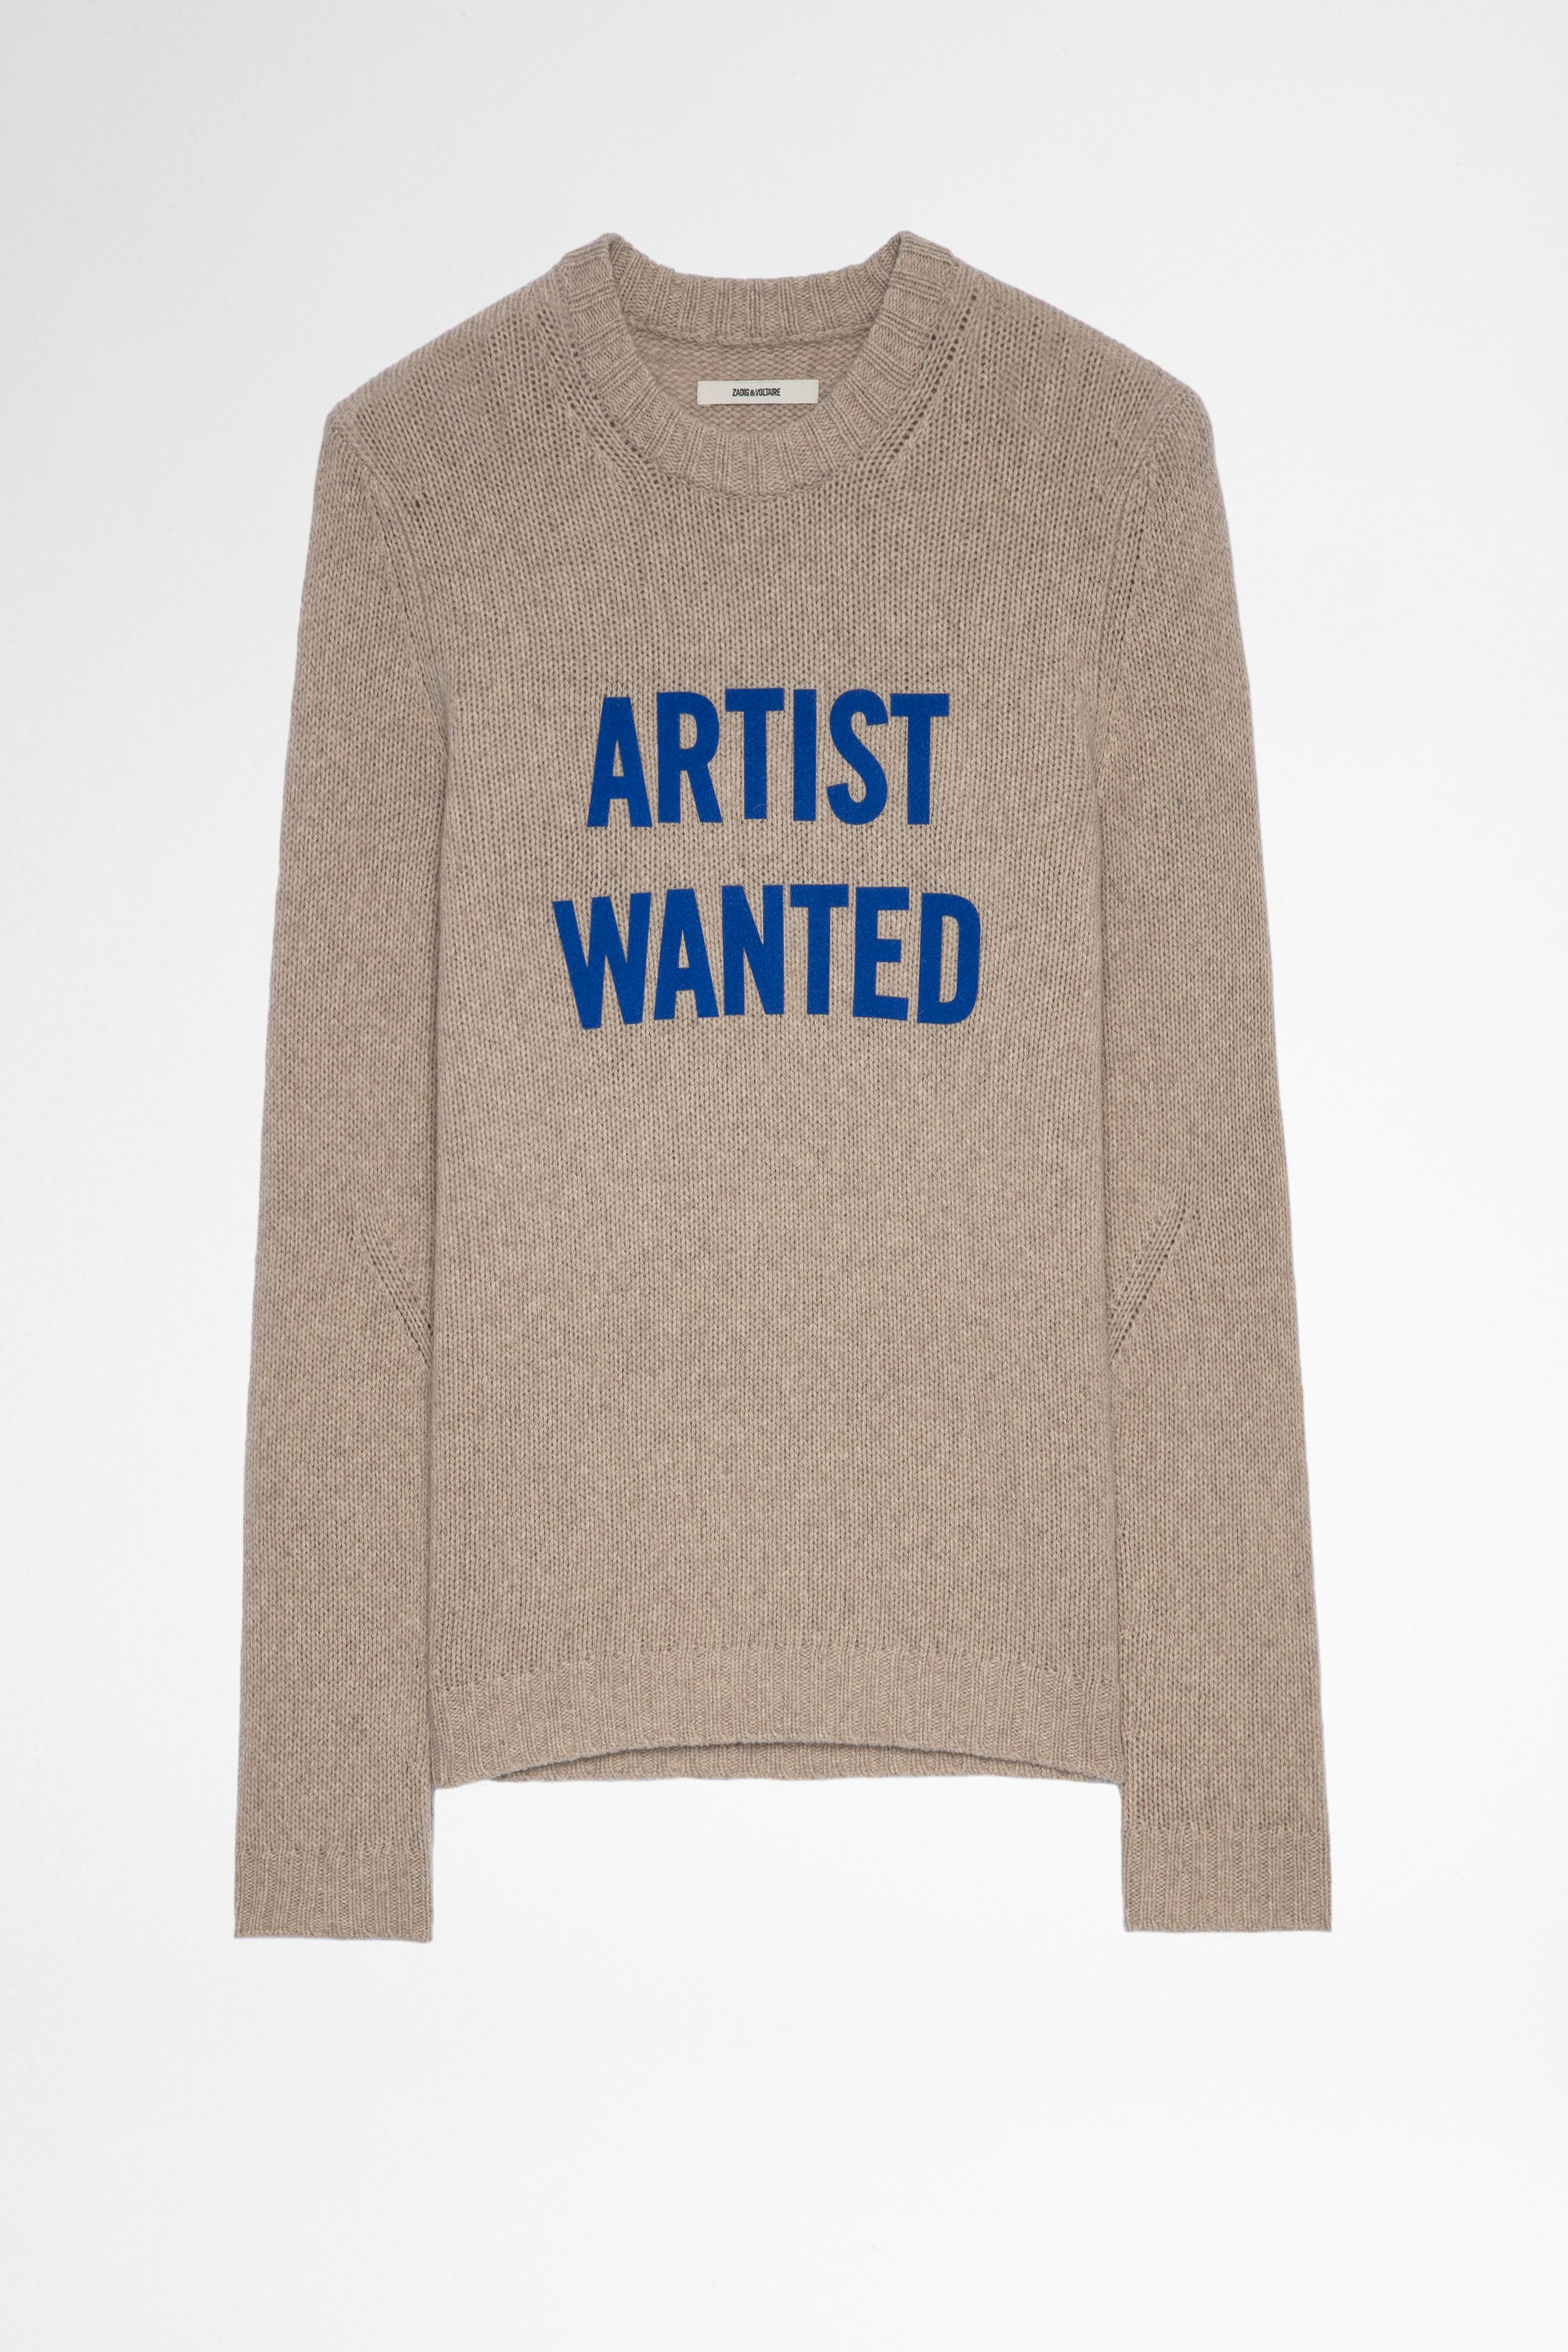 Maglione Kennedy Artist Wanted Maglione in lana merino beige Artis Wanted Homme